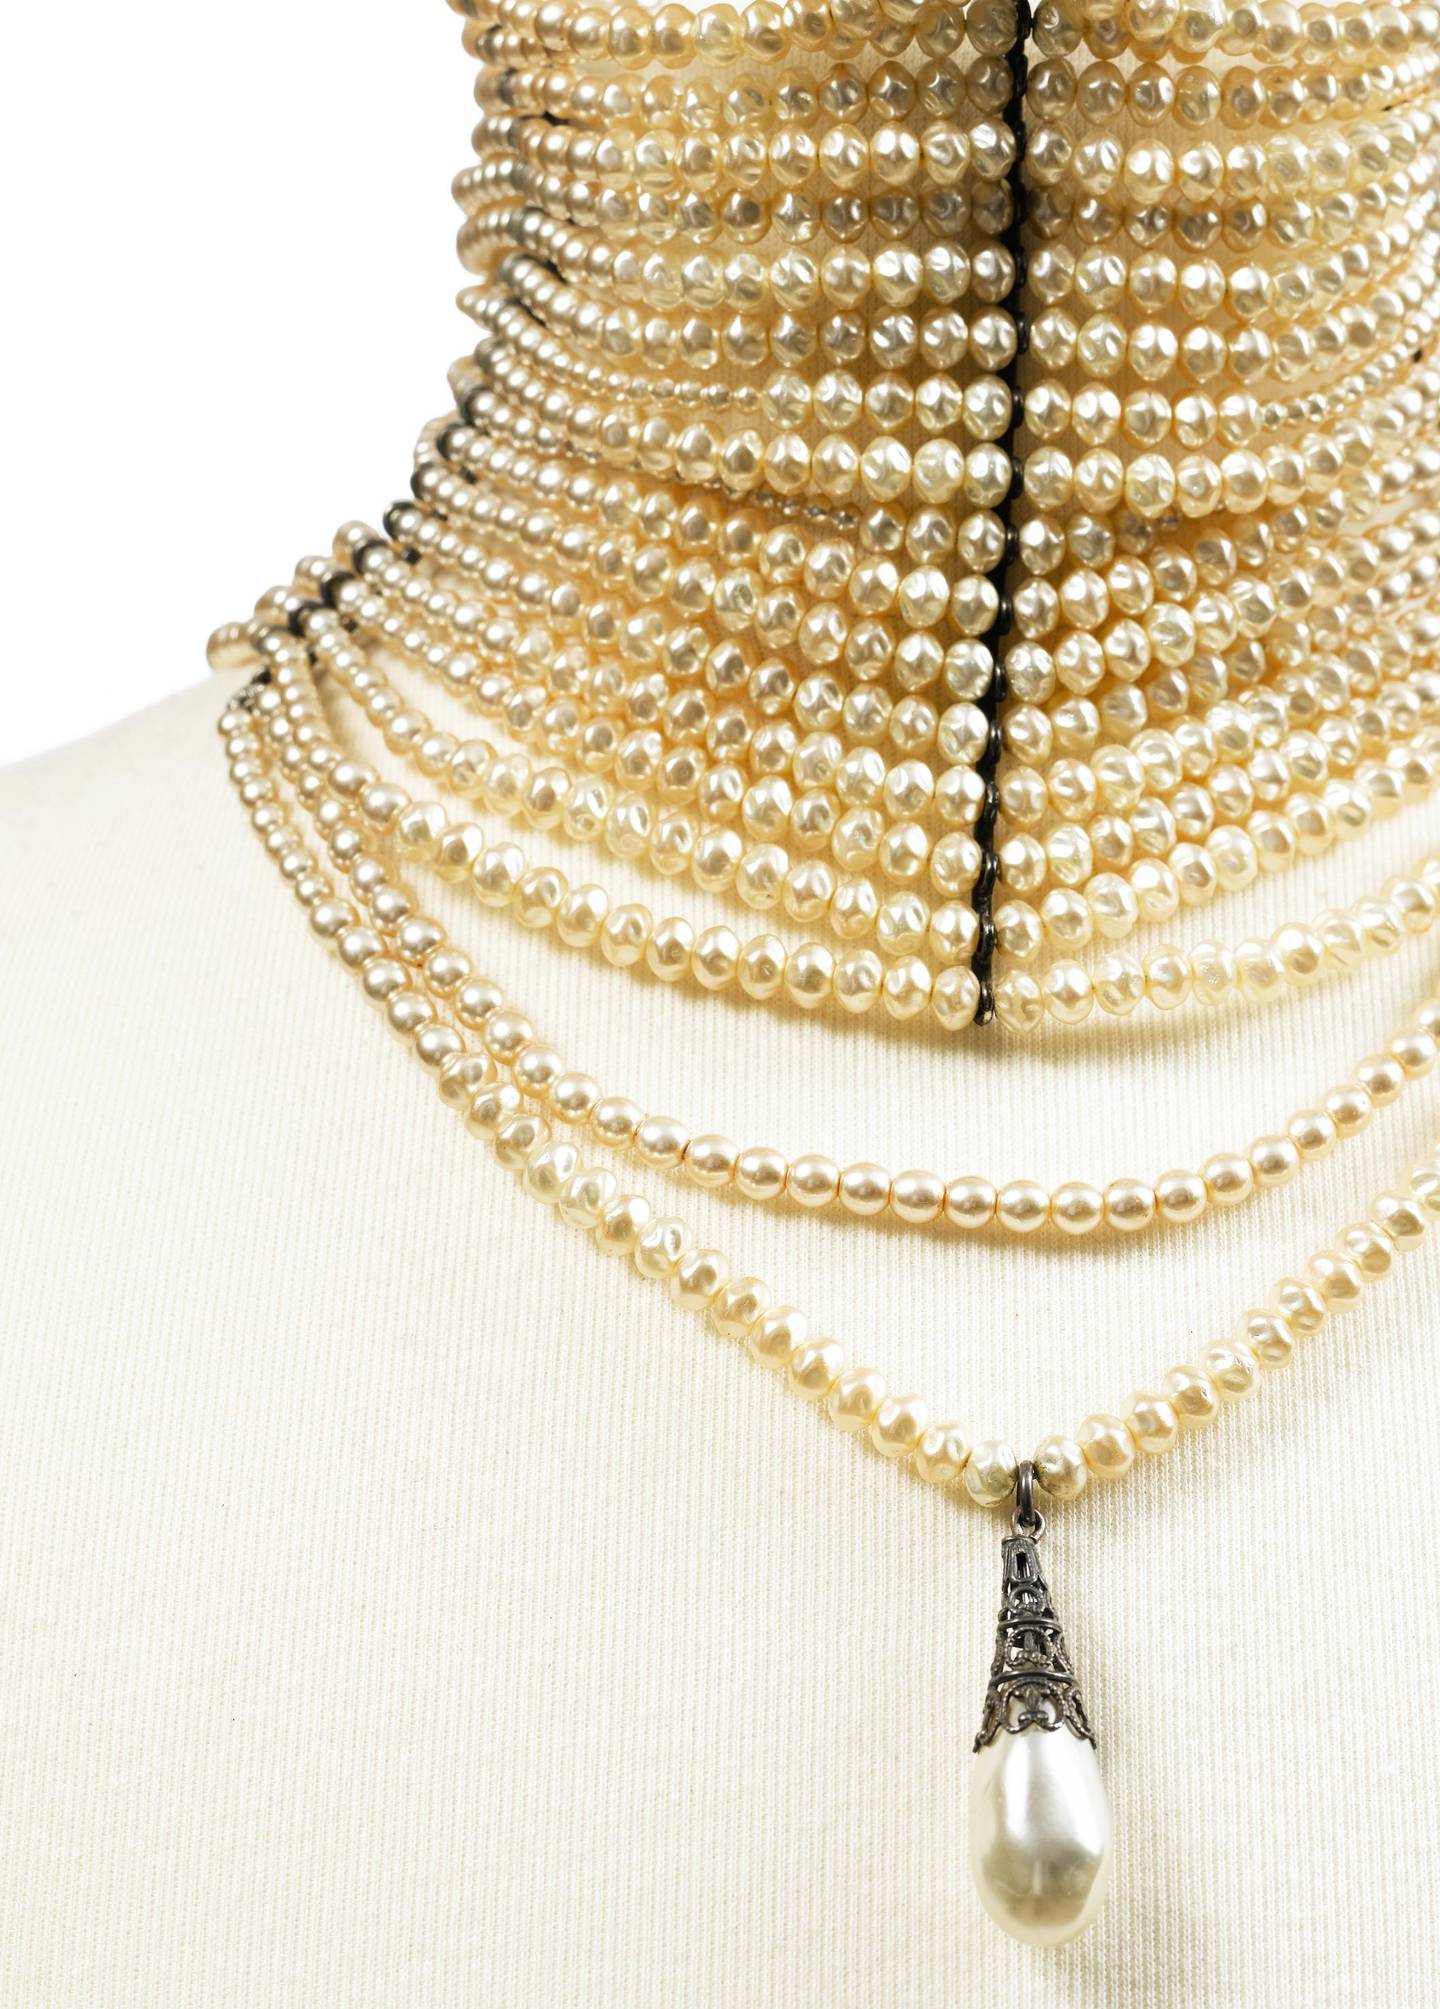 Christian Dior By John Galliano, Rare Massai Necklace Of Metal, Imitation Pearls And Satine Ribbon. Courtesy Sotheby's